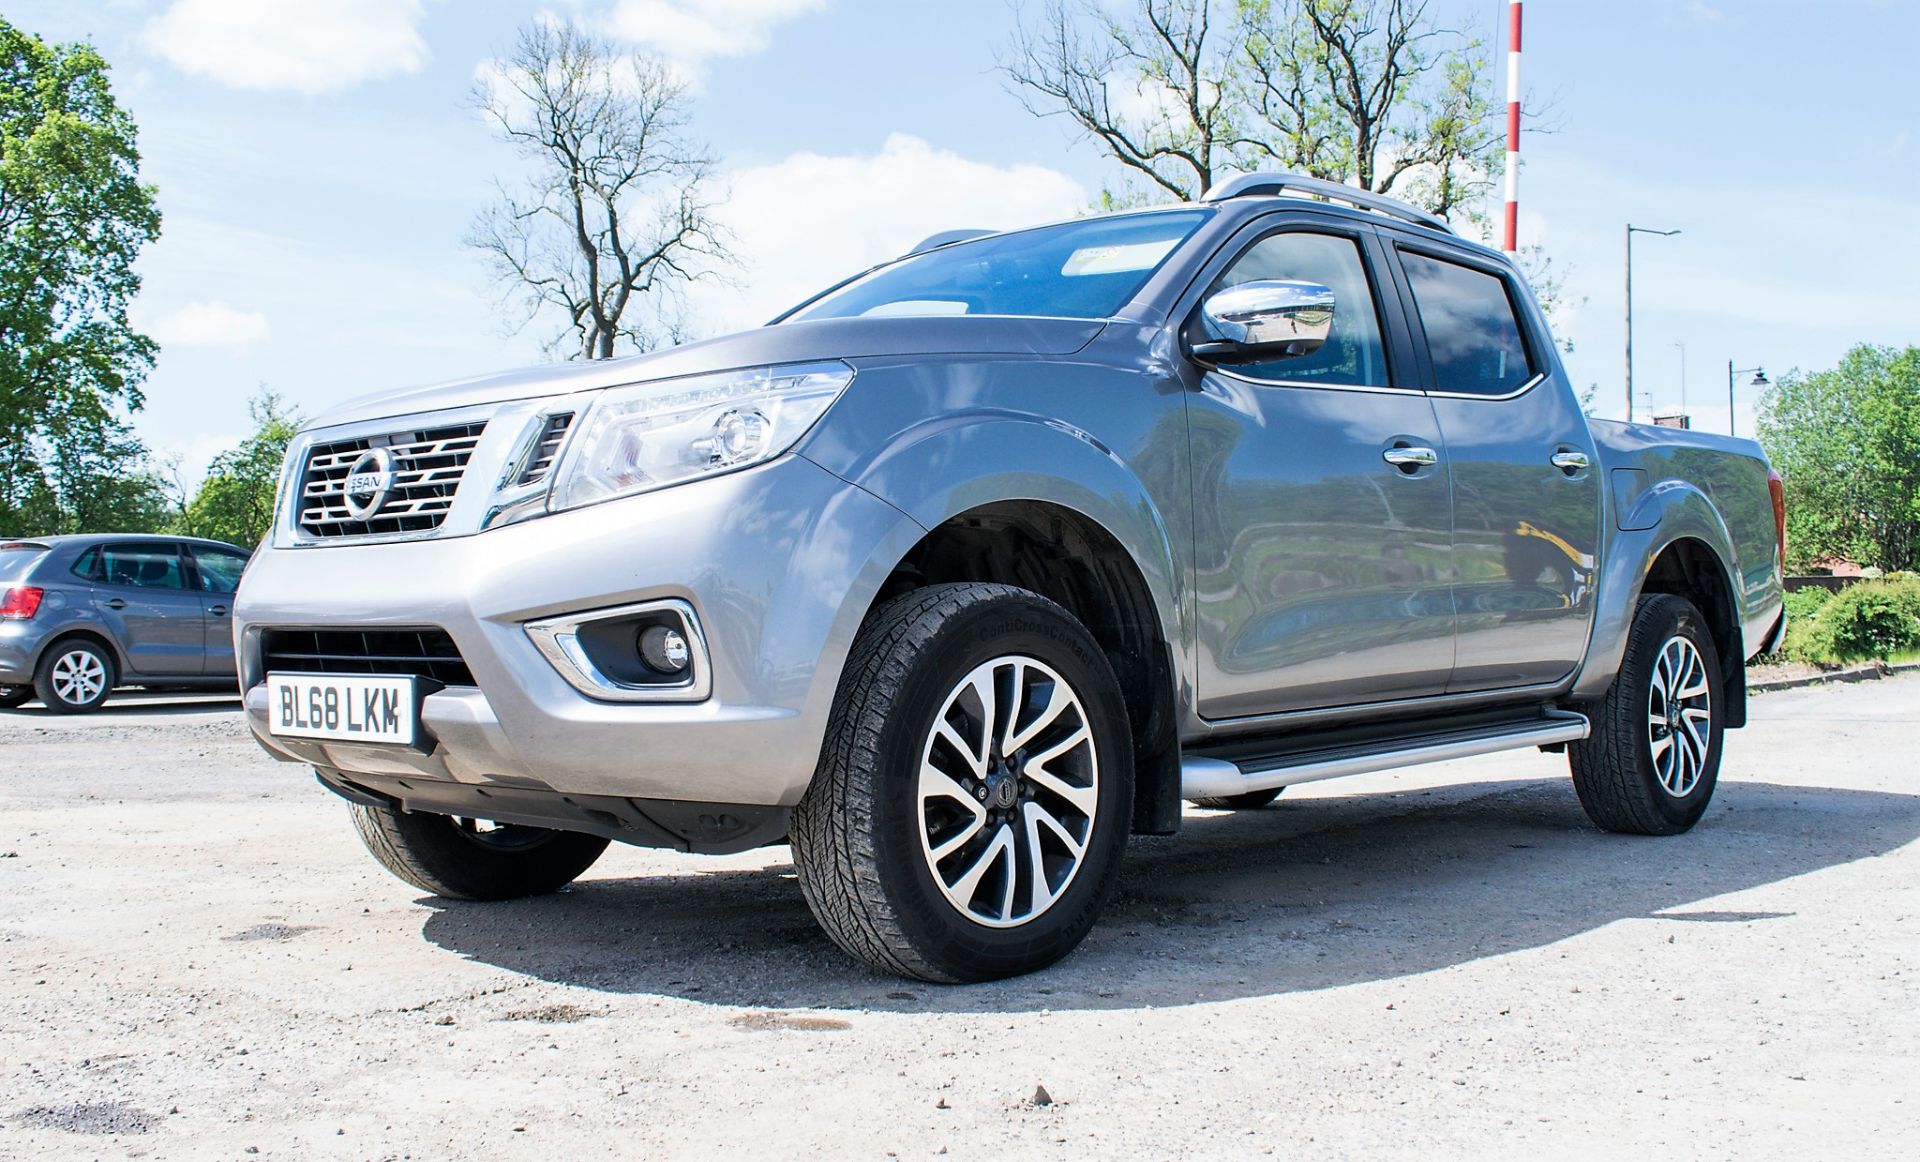 Nissan Navara Tekna DCi Auto double cab pick up truck Registration Number: BL68 LKM Date of